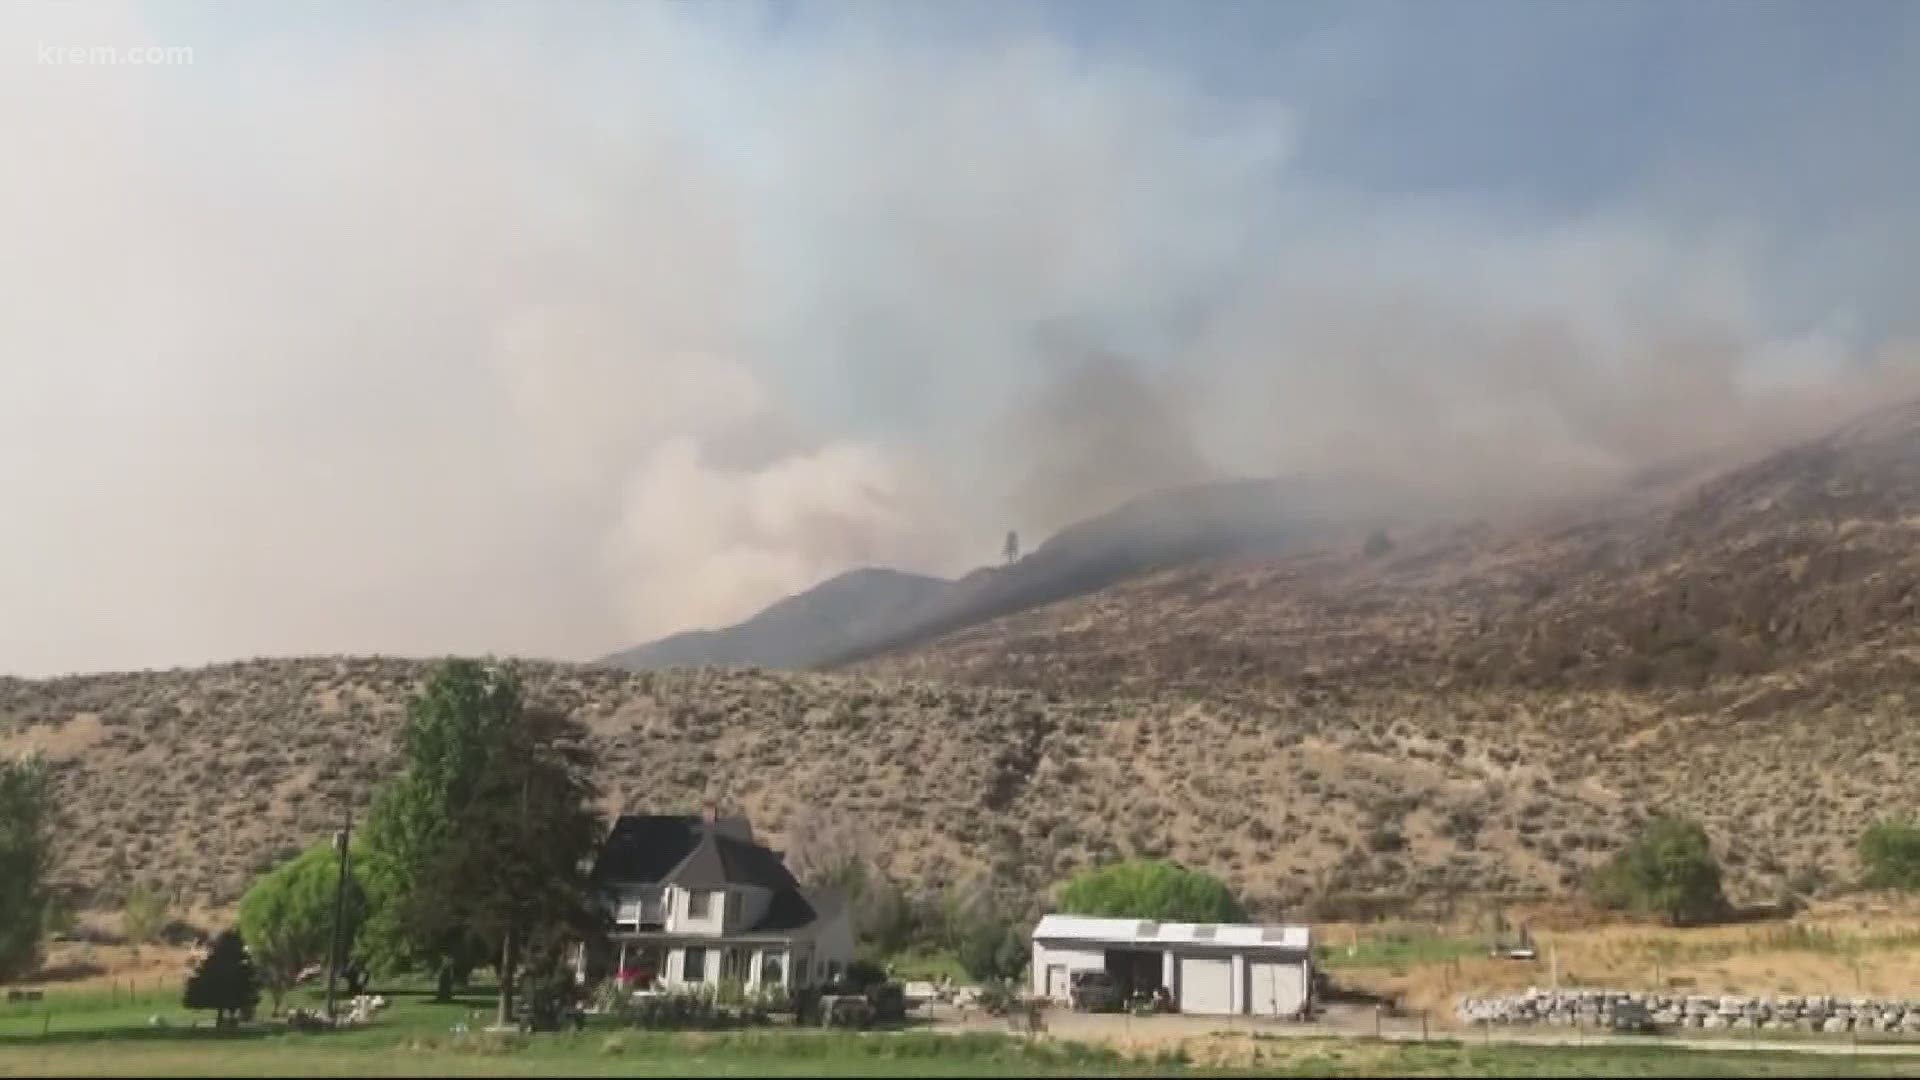 Several homes were destroyed on Palmer Mountain after wildfires ravaged the region in September.